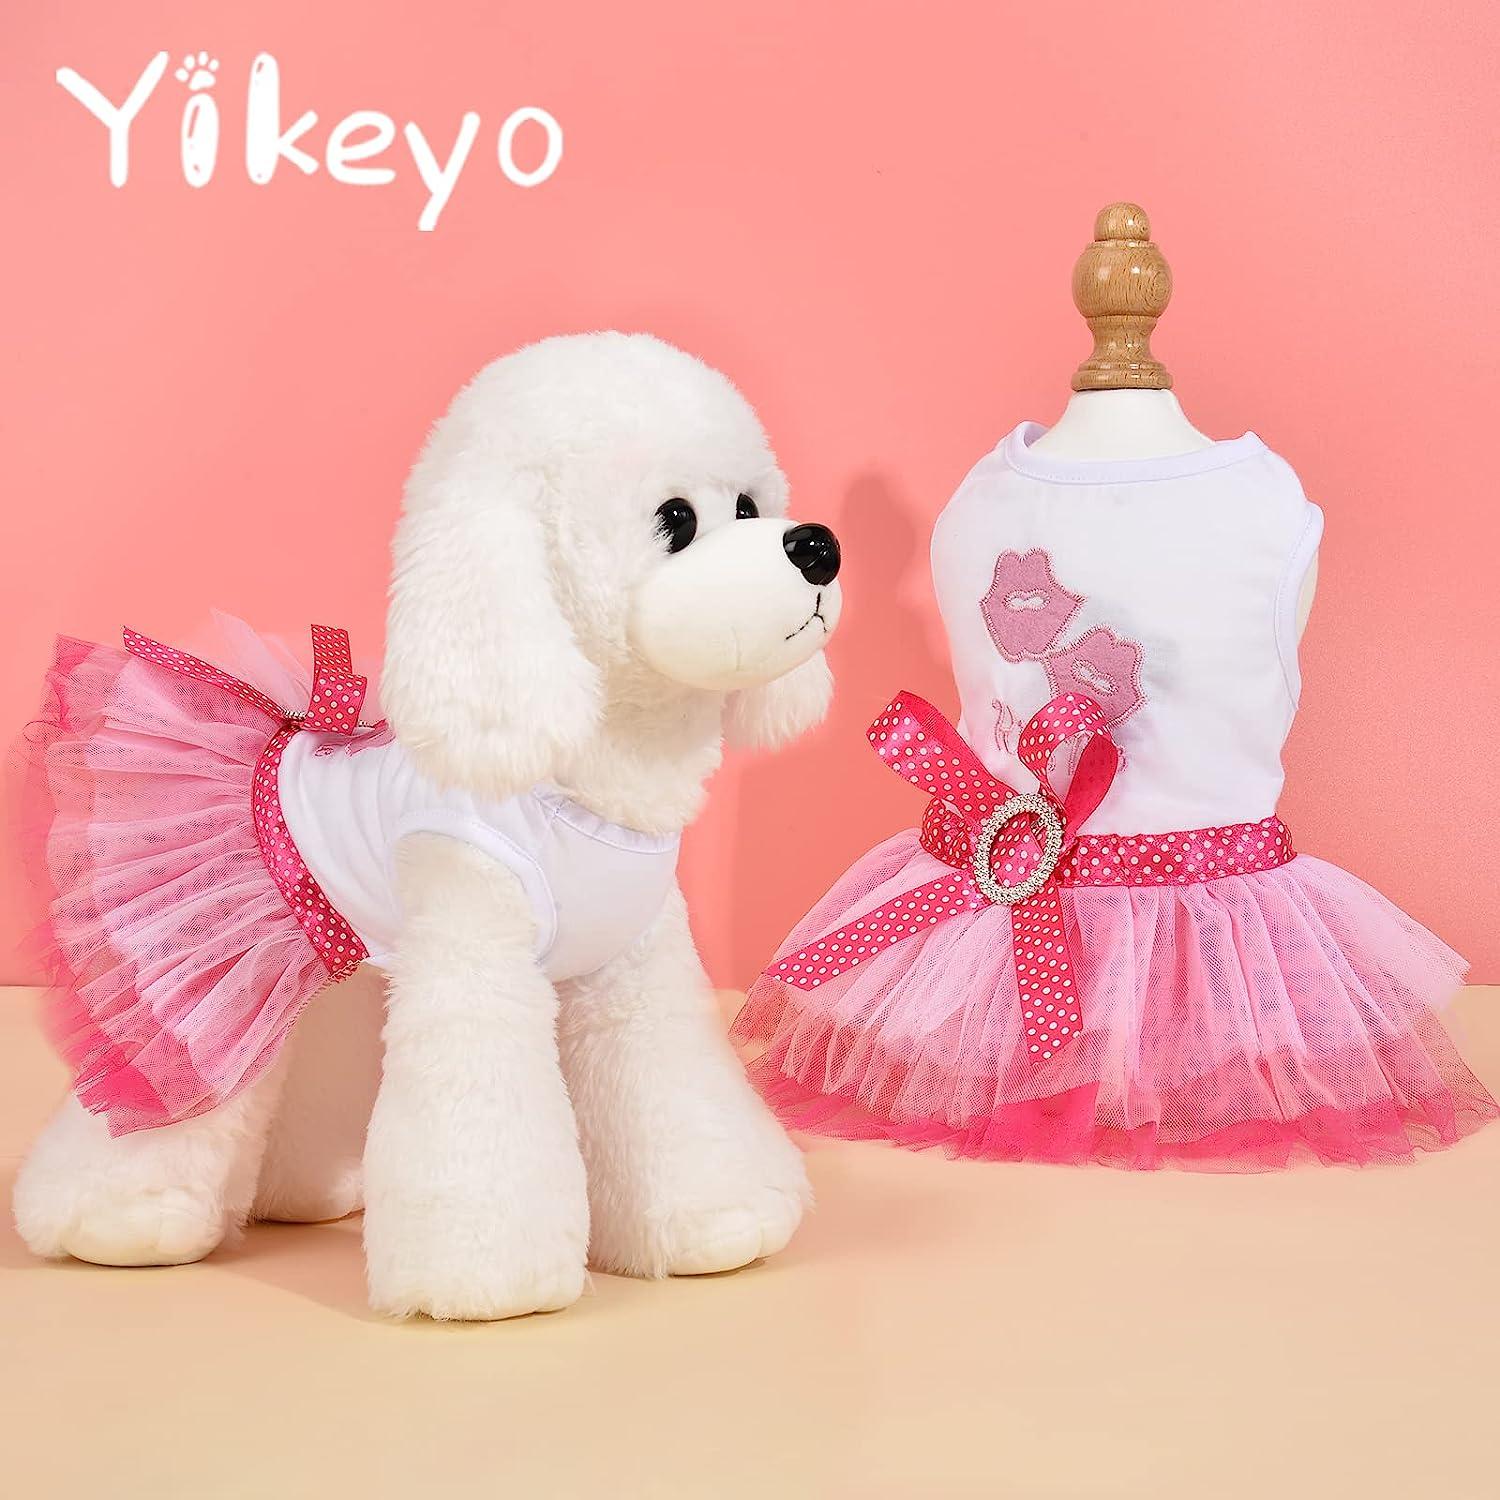 Yikeyo Dog Dress Pink Tulle Dog Dresses for Small Dogs Doggie Outfit  Bow-tie Girl Dog Clothes Pet Apparel for Birthday Wedding Holiday (Pink,  Small)